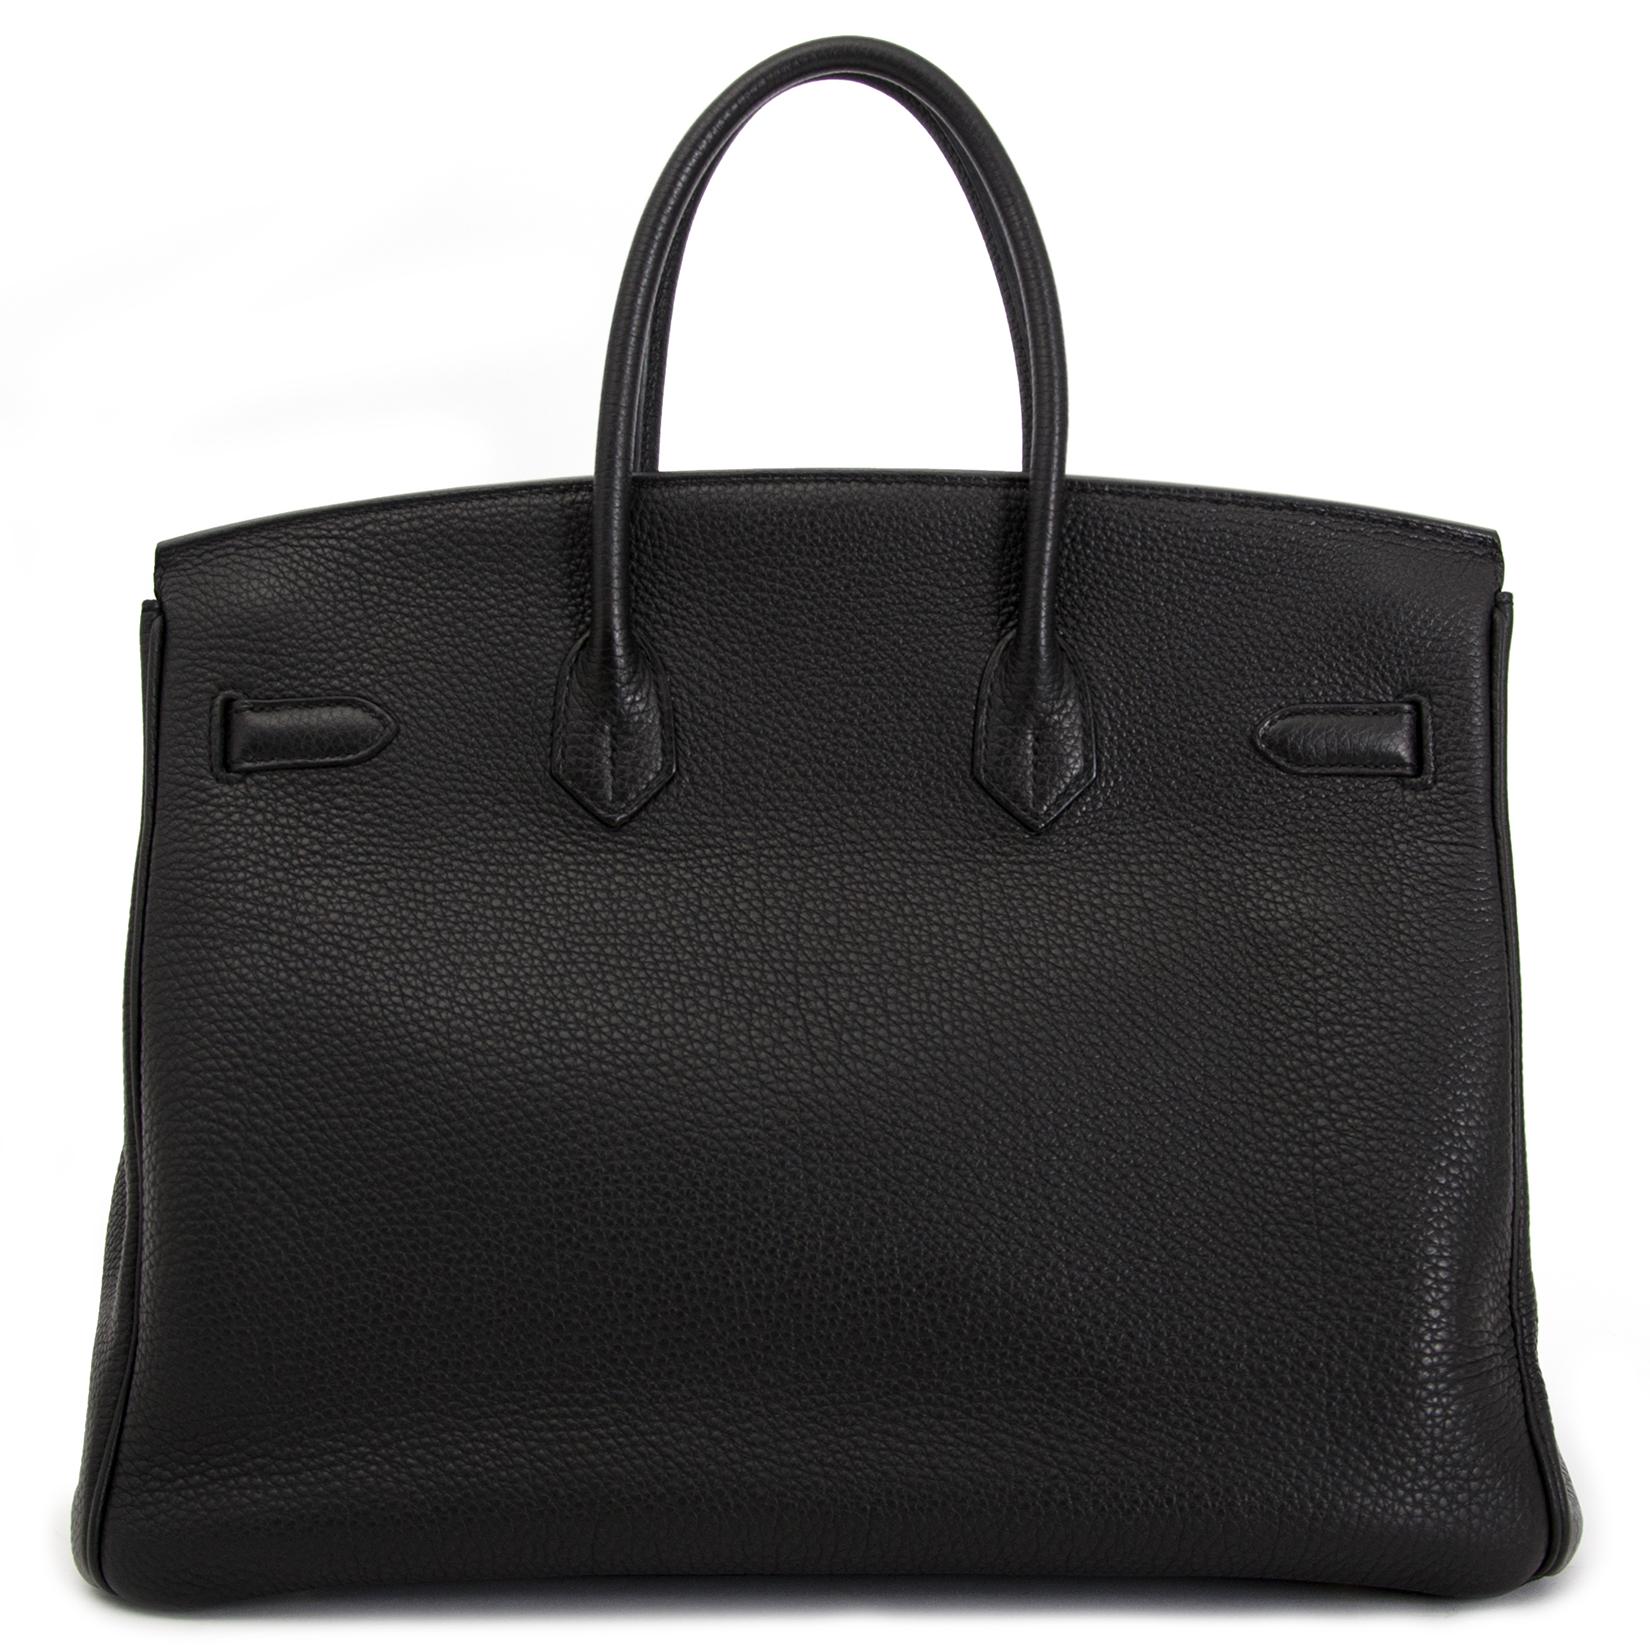 As New Hermes Birkin 35 Black Togo GHW In Excellent Condition For Sale In Antwerp, BE